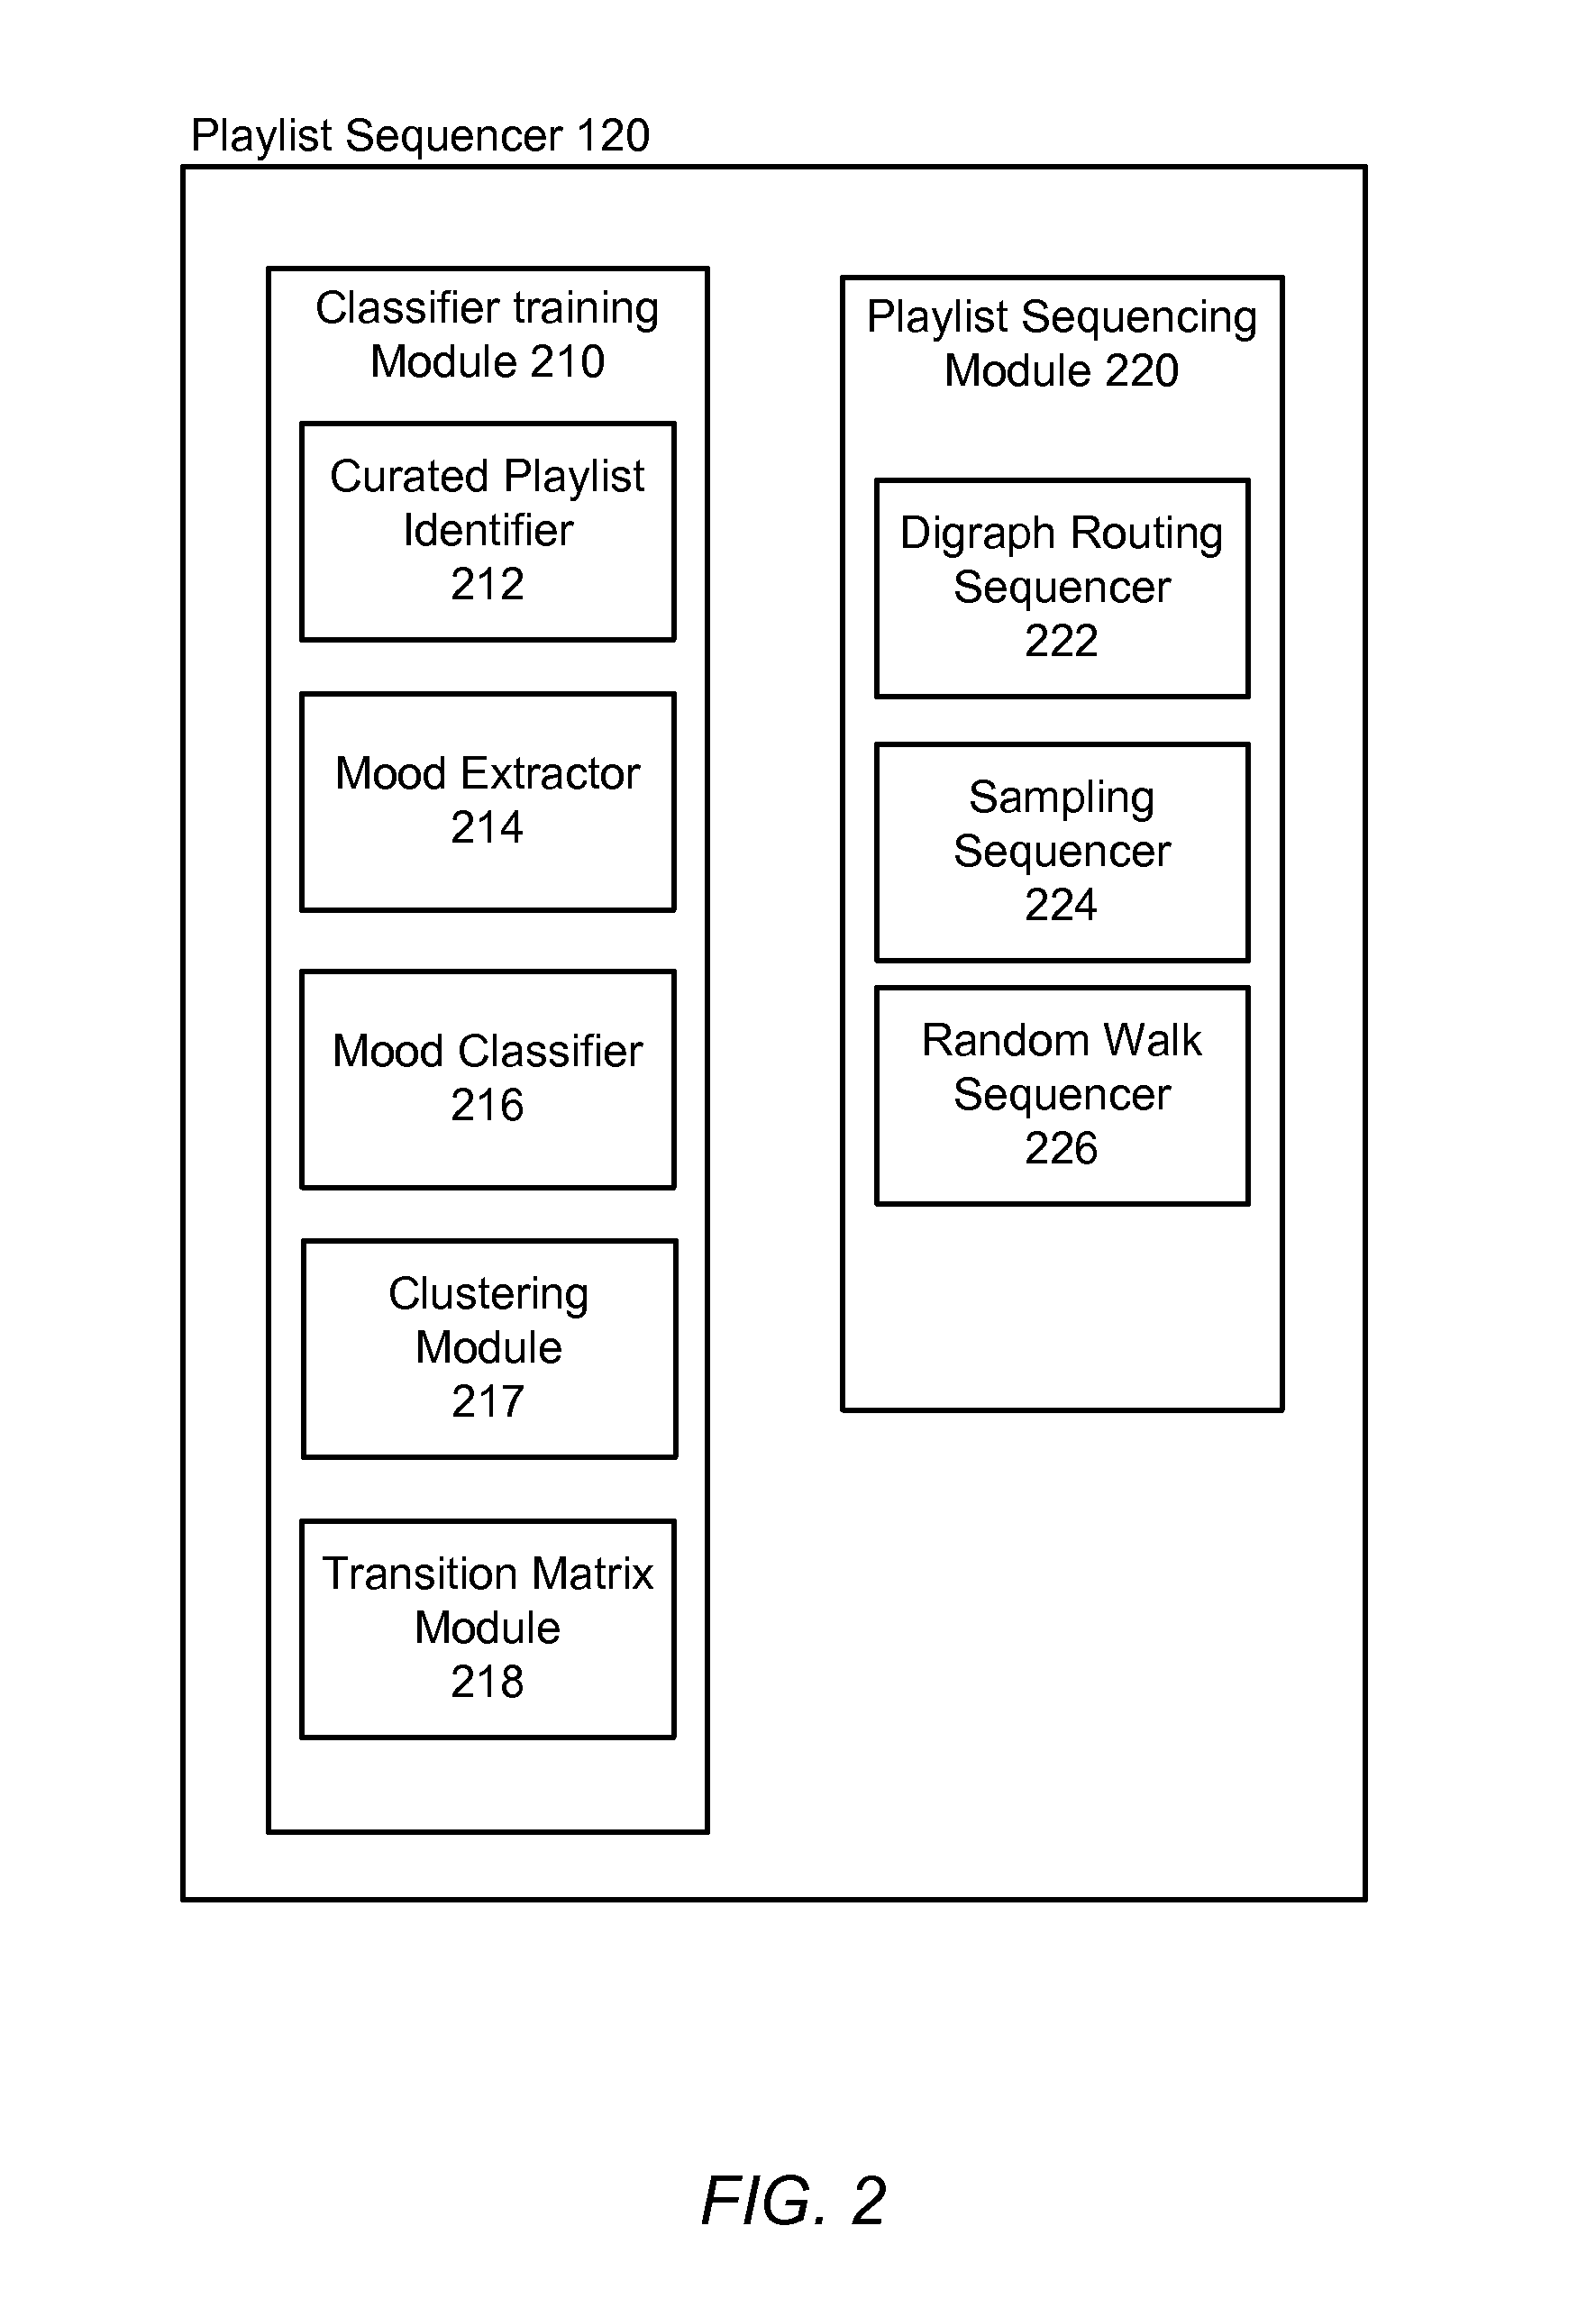 Automatic sequencing of video playlists based on mood classification of each video and video cluster transitions